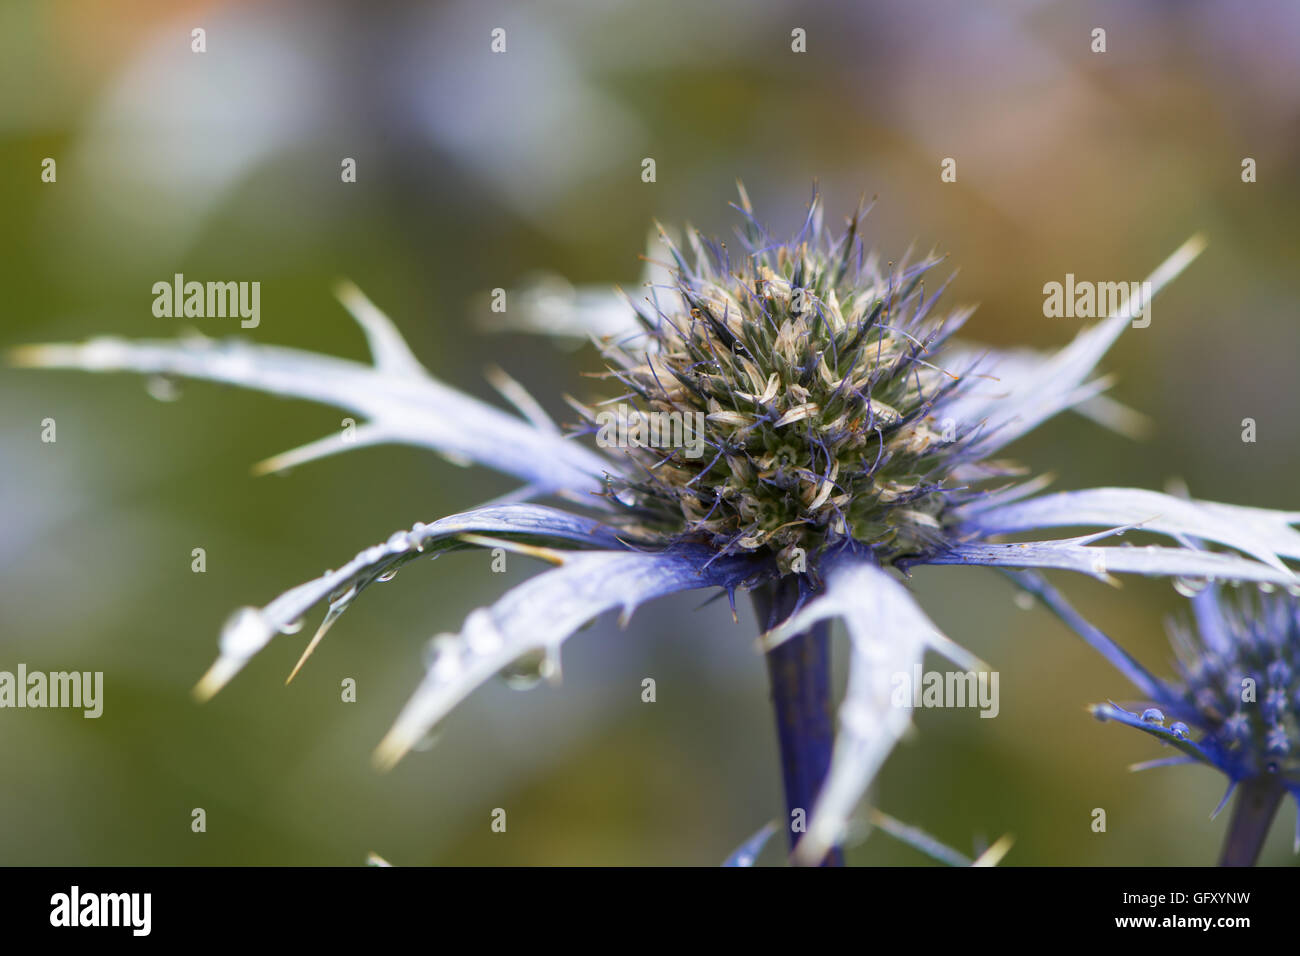 Mediterranean sea holly (Eryngium bourgatii). Spherical blue flowers with spiny bracts of flowering plant in the family Apiaceae Stock Photo